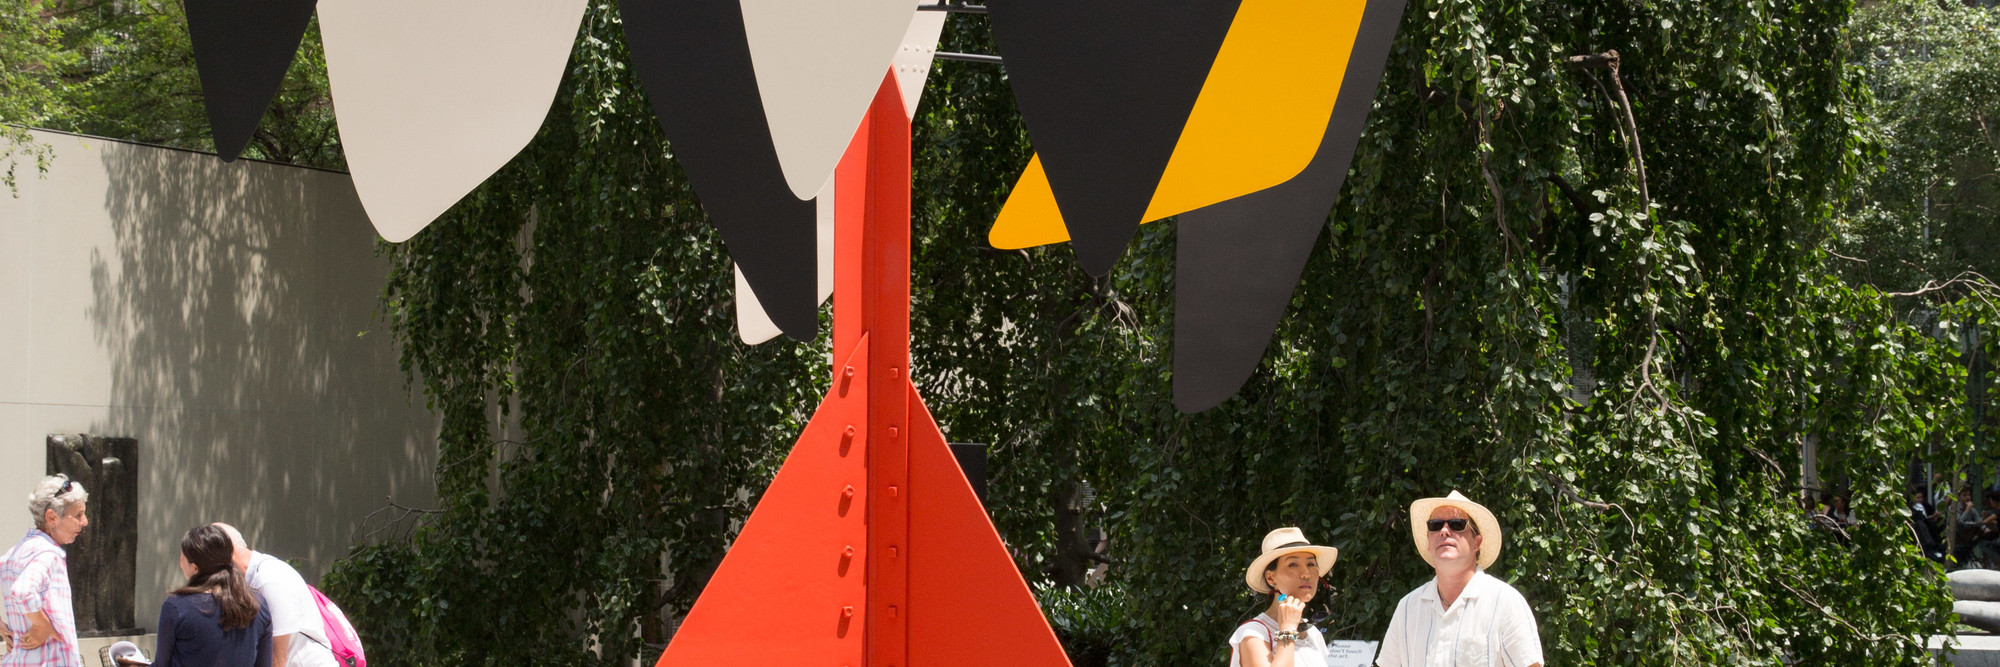 Image of The Abby Aldrich Rockefeller Sculpture Garden at The Museum of Modern Art. Pictured: Alexander Calder. Sandy’s Butterfly. 1964. Painted sheet steel and iron rods. Gift of the artist. © 2016 Calder Foundation, New York/Artists Rights Society (ARS), New York. Photos: Gus Powell